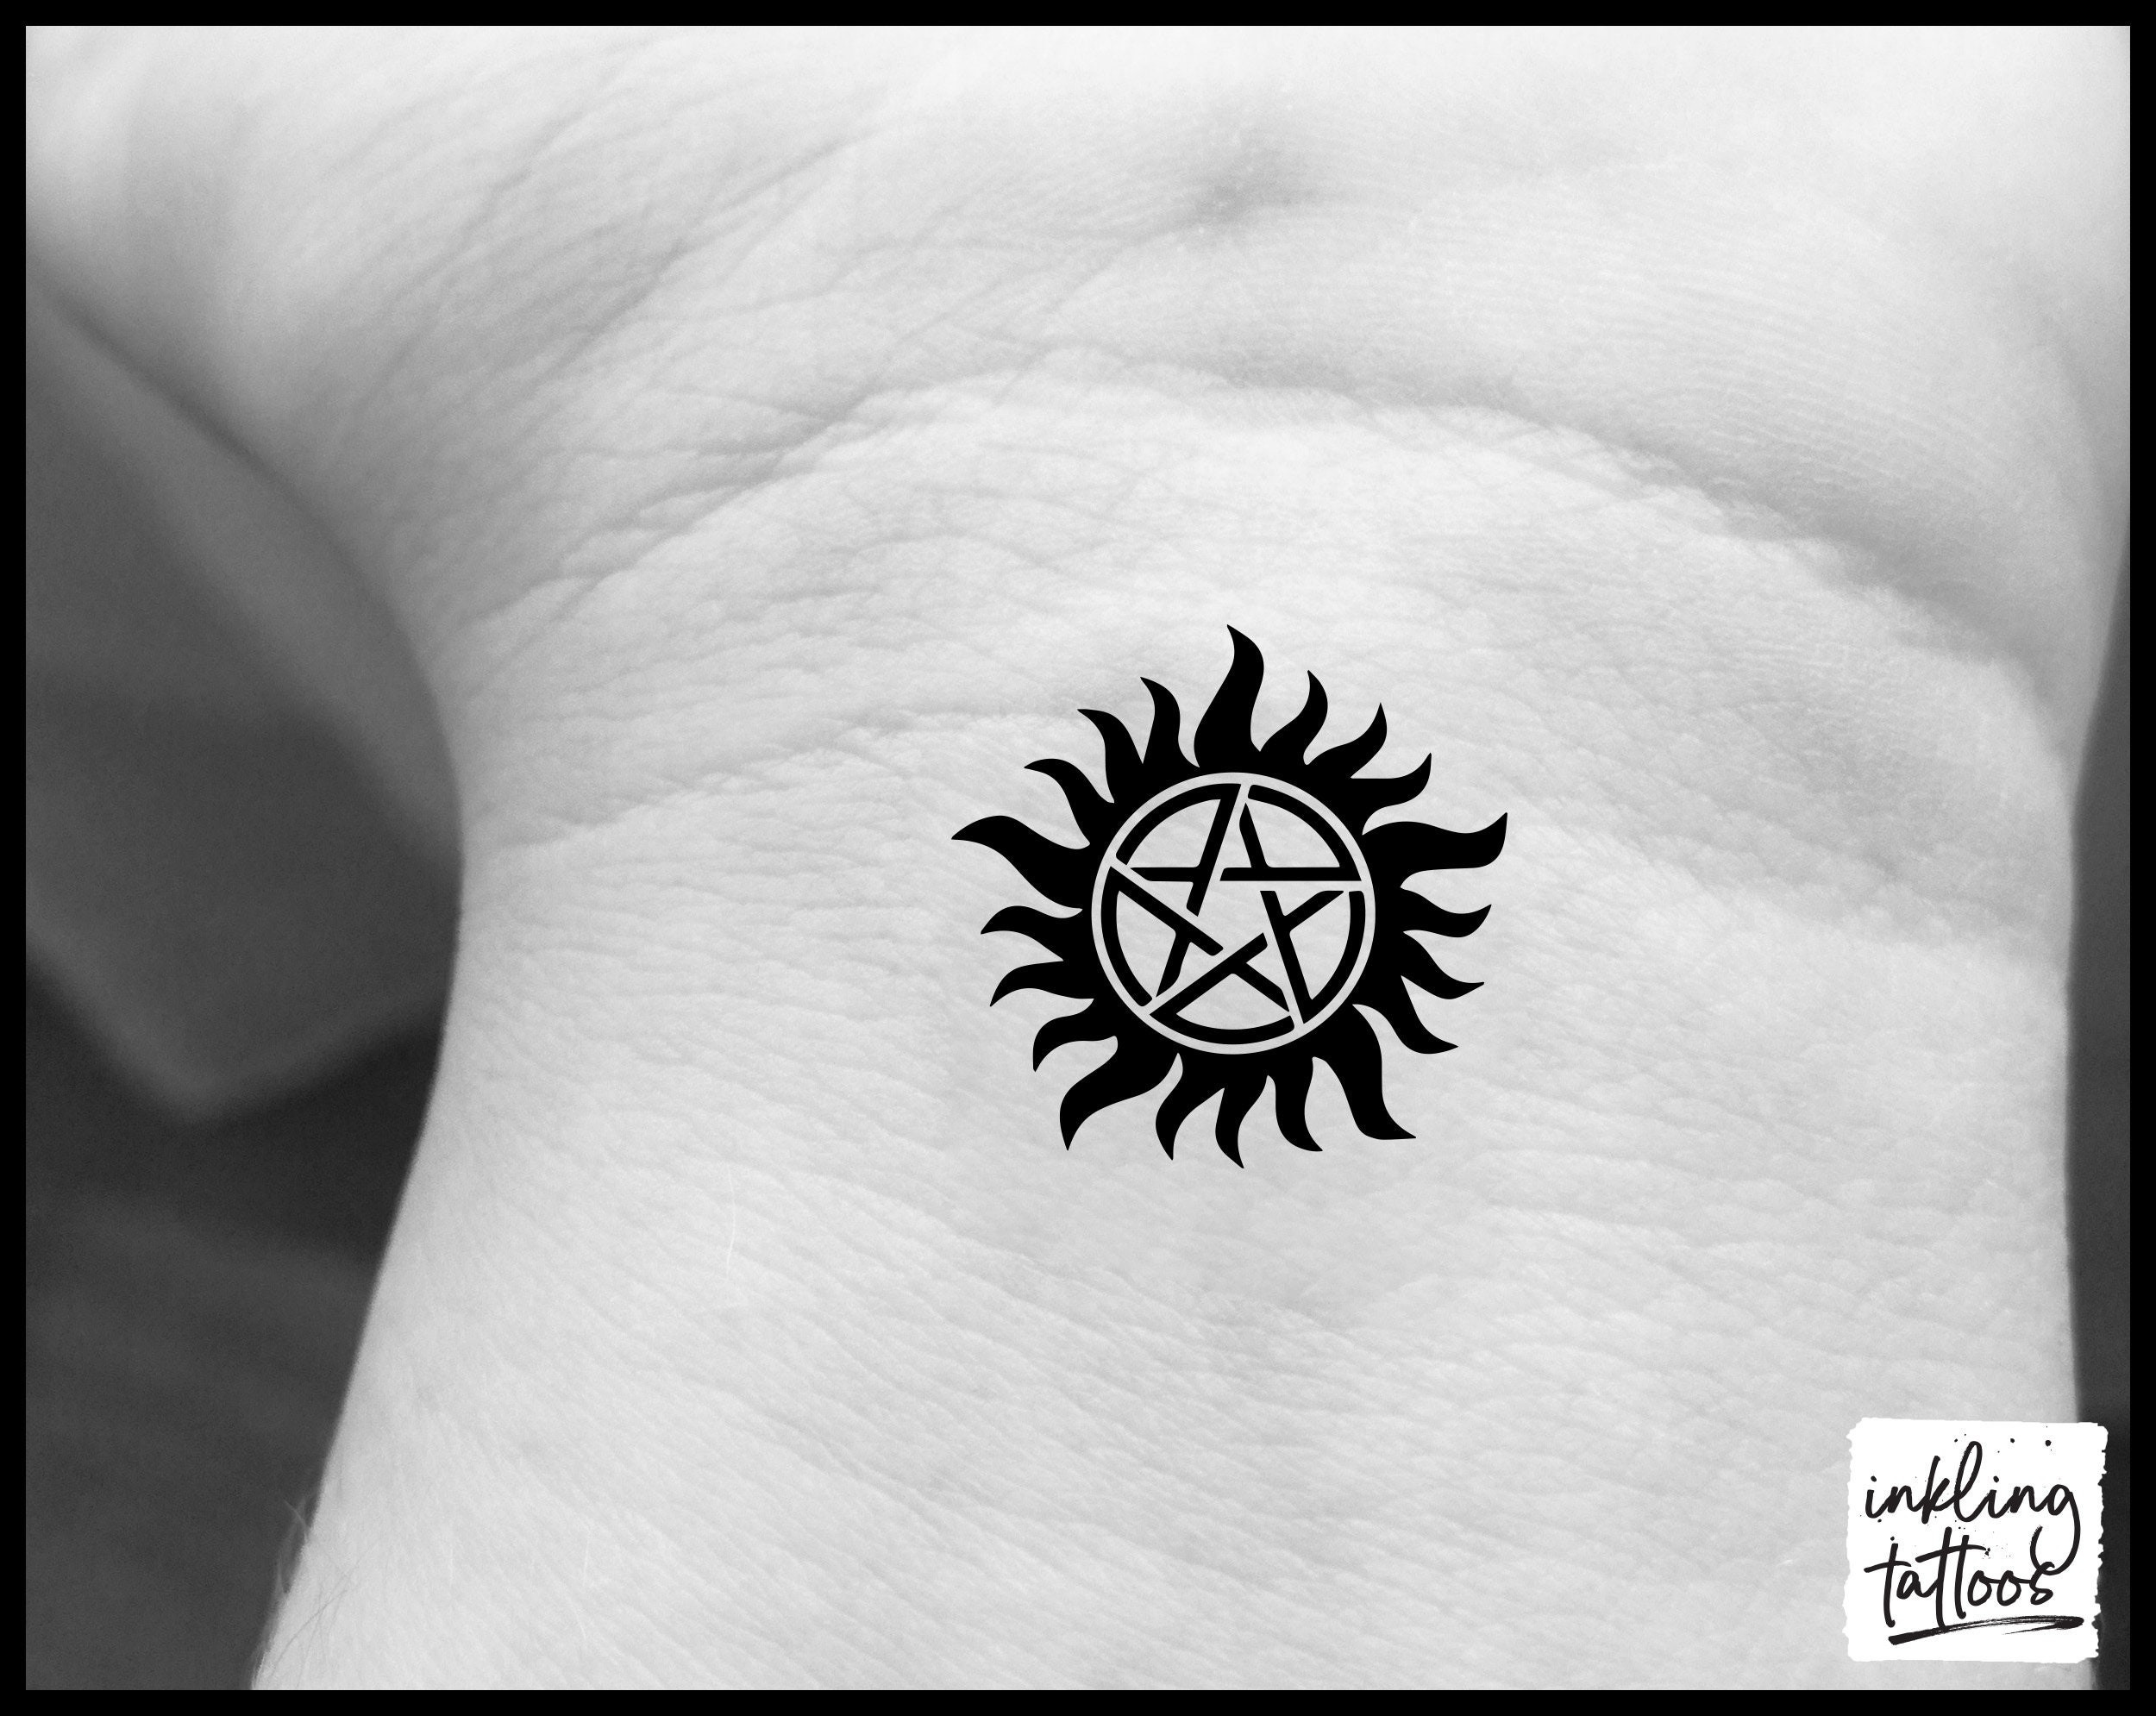 35 Best Supernatural Tattoo Designs  Protect Yourself from Evil